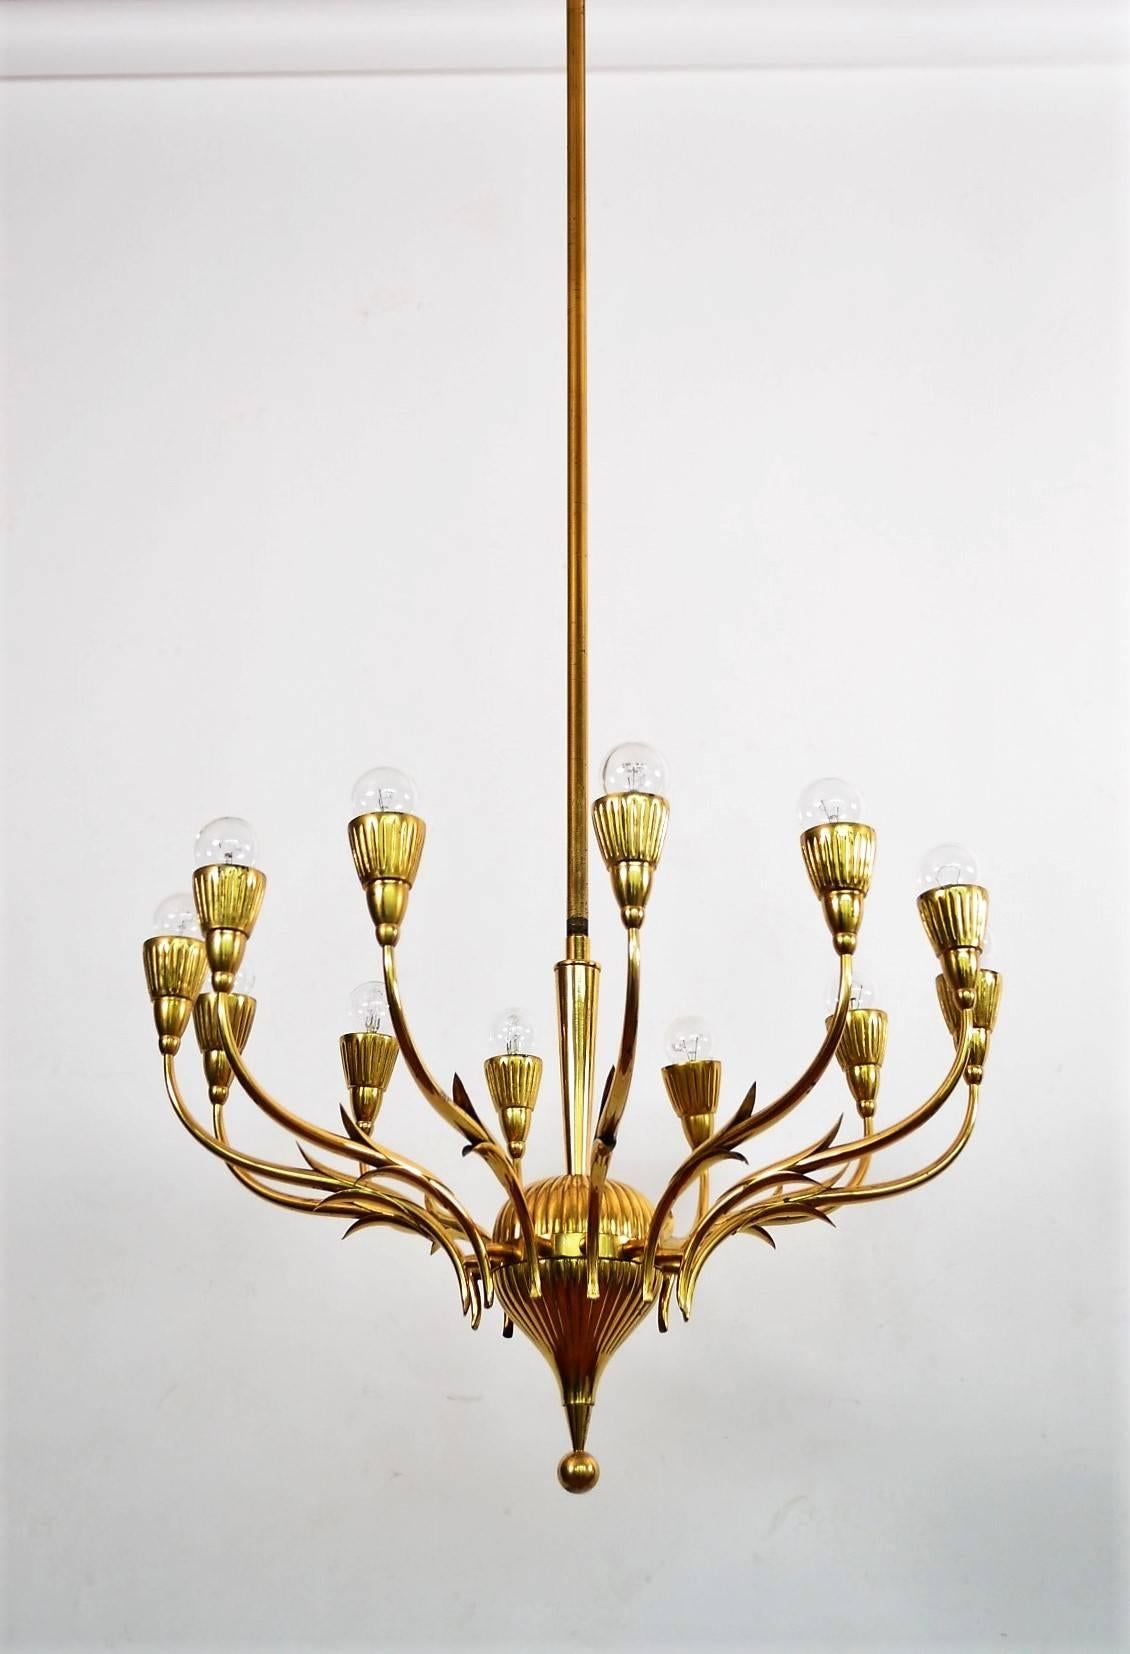 Gorgeous and elegant mid-century full brass chandelier with extra long original center rod, suitable for rooms with high ceiling, entrance hall or staircase.
Made in Italy, 1950s.
The chandelier is equipped with twelve small bulb holders for